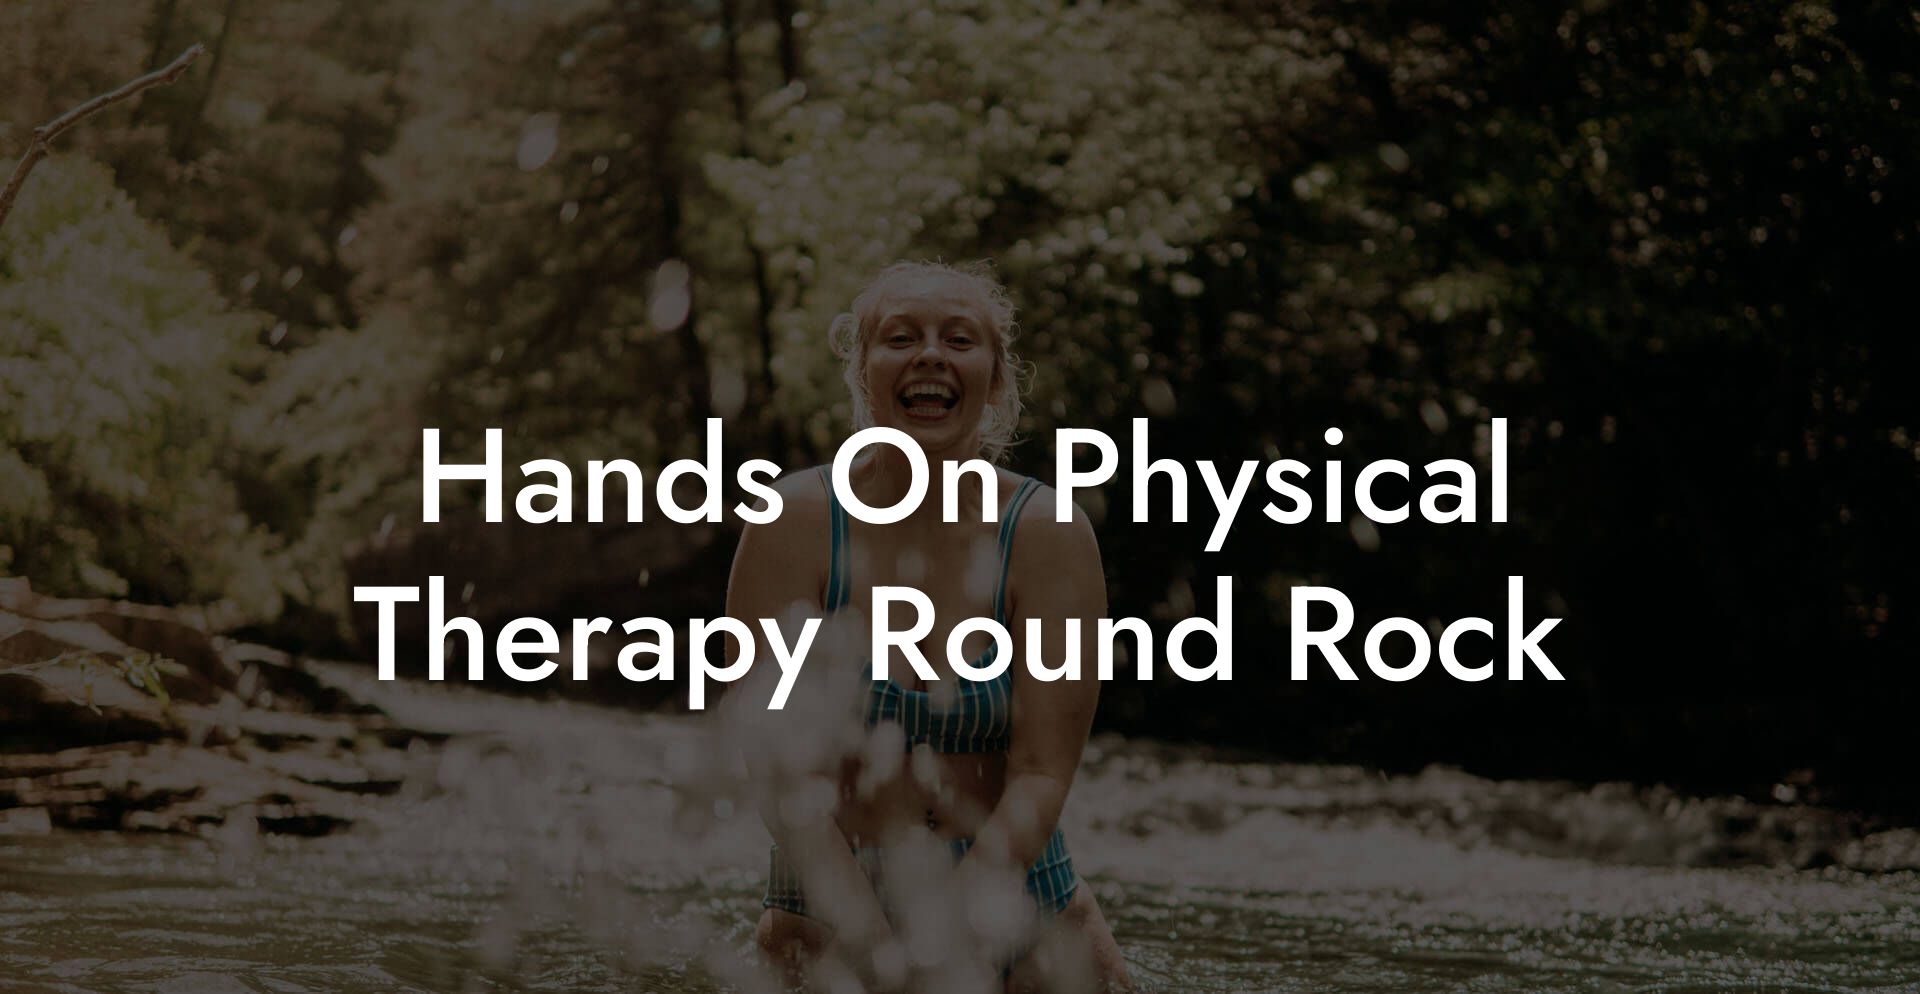 Hands On Physical Therapy Round Rock